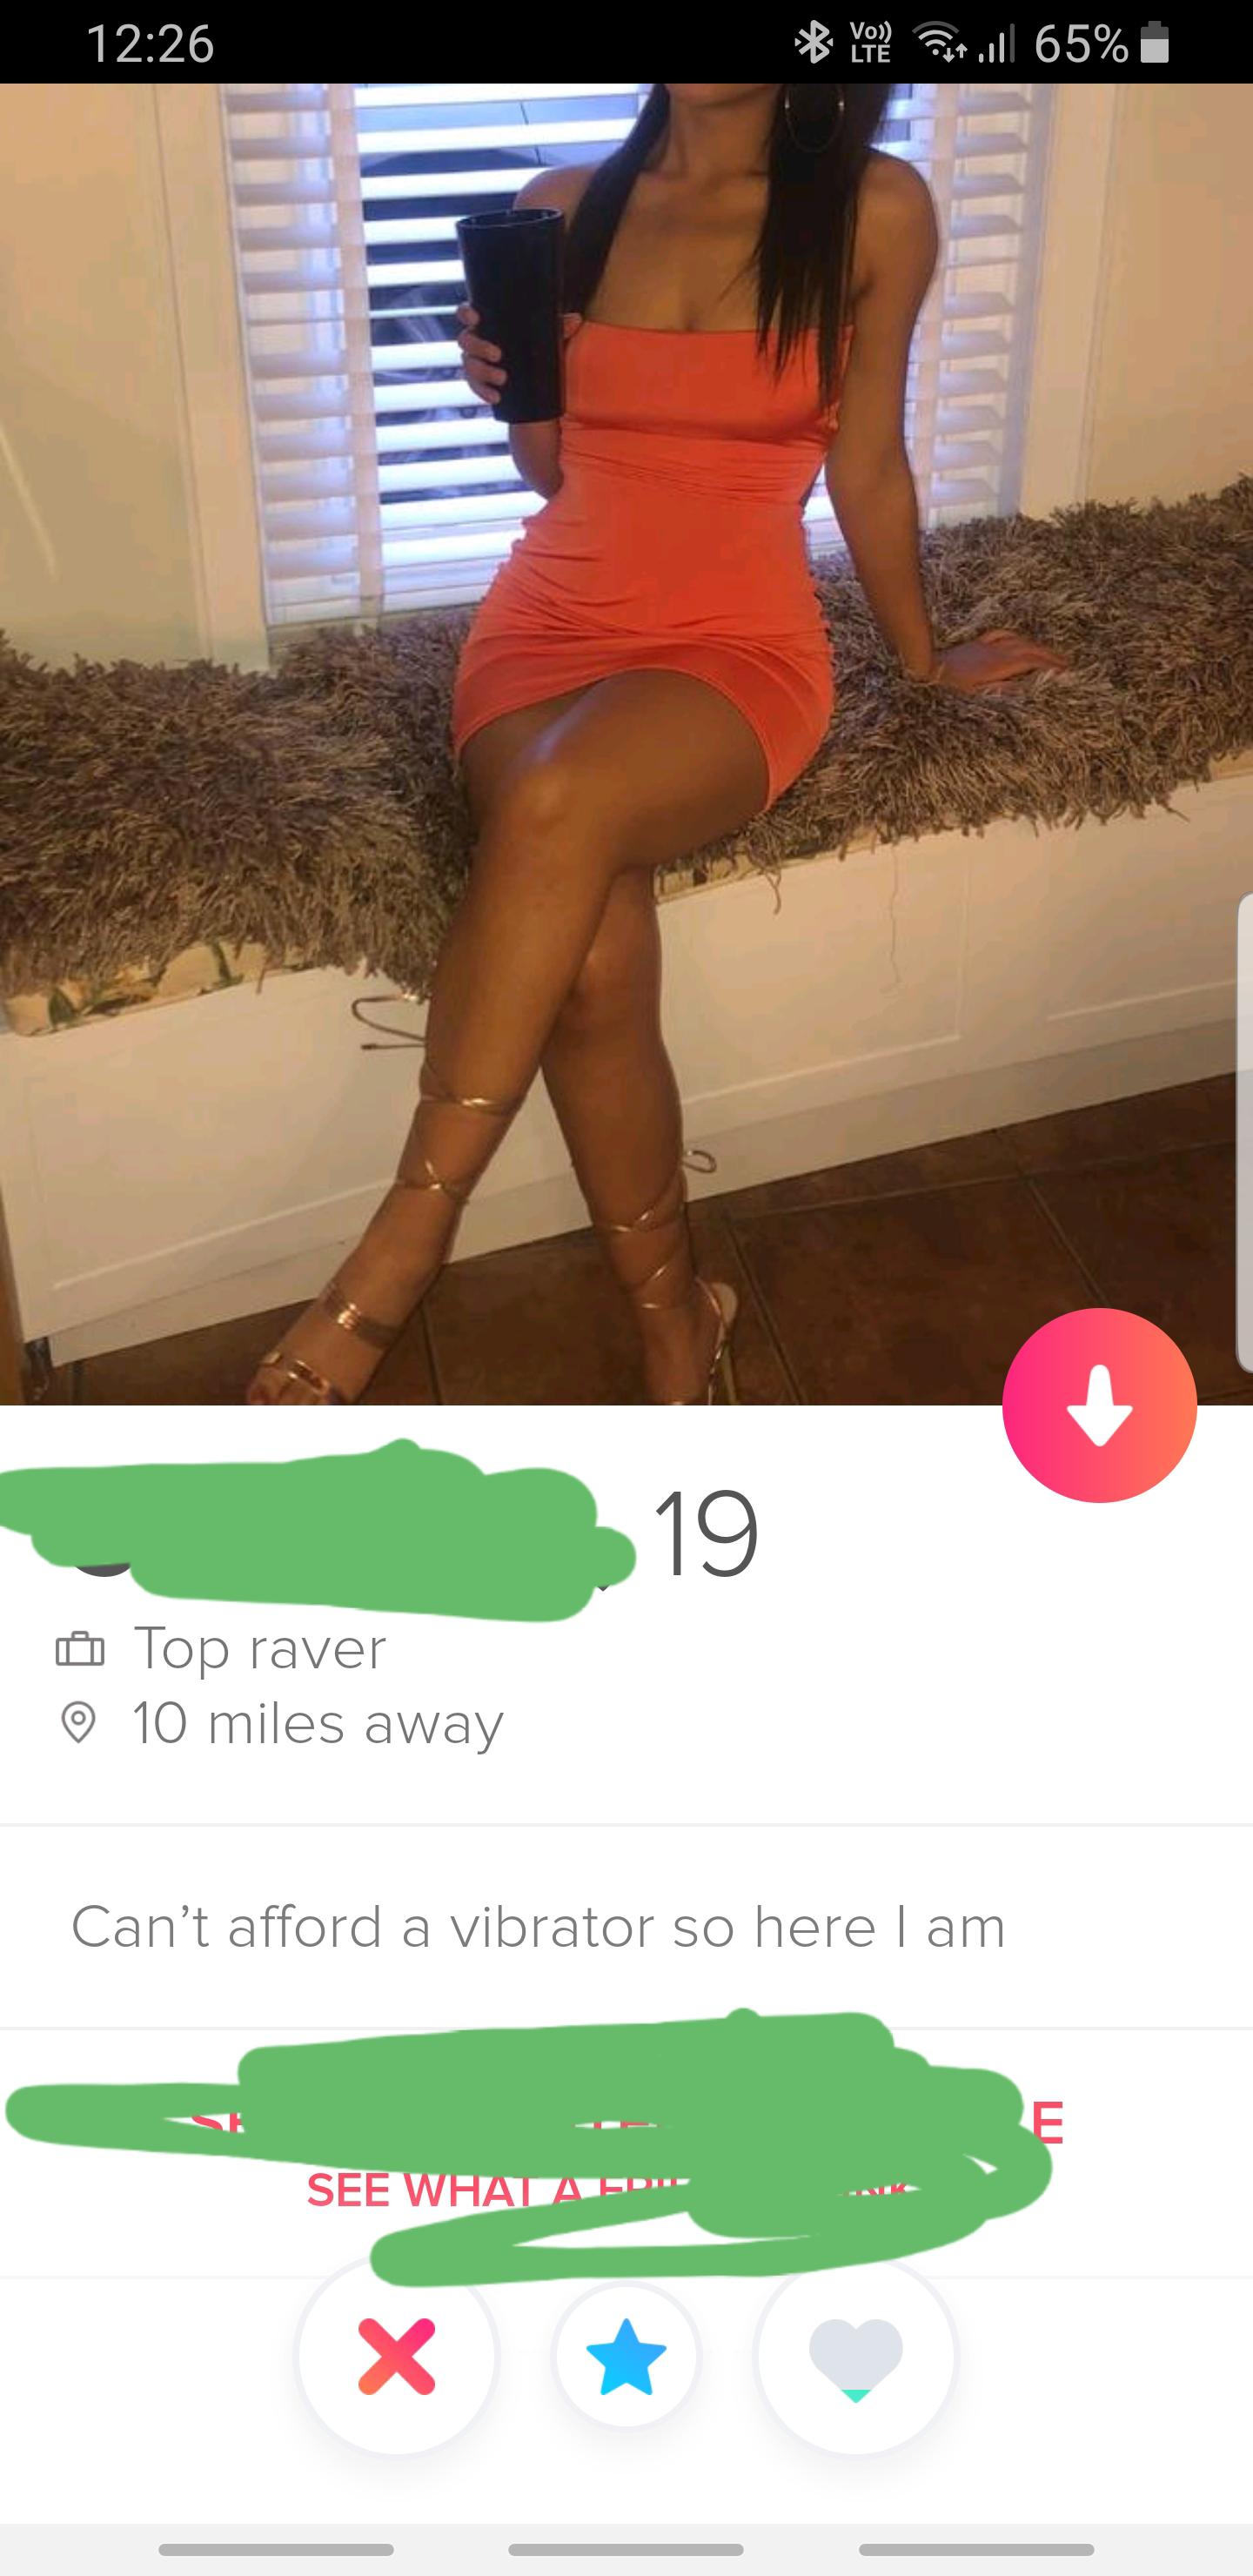 tinder - thigh - You Put ull 65% Top raver 10 miles away Can't afford a vibrator so here I am See Whata Sd X